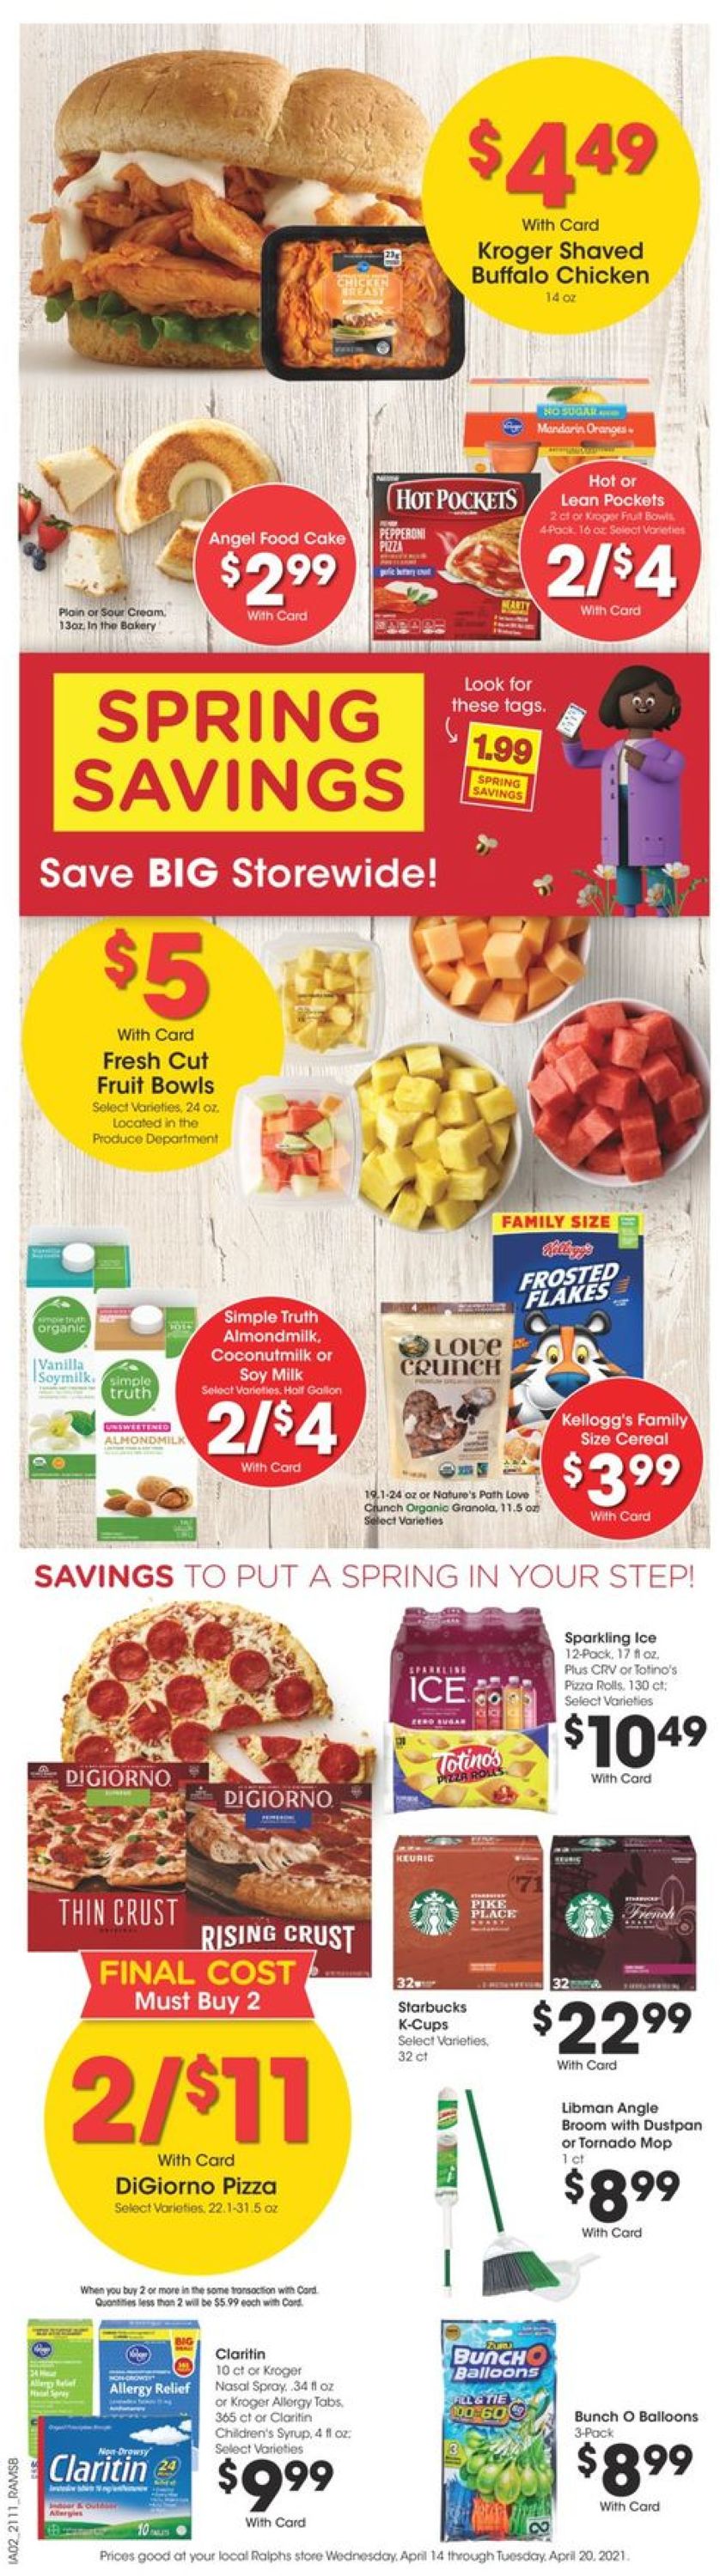 Catalogue Ralphs from 04/14/2021